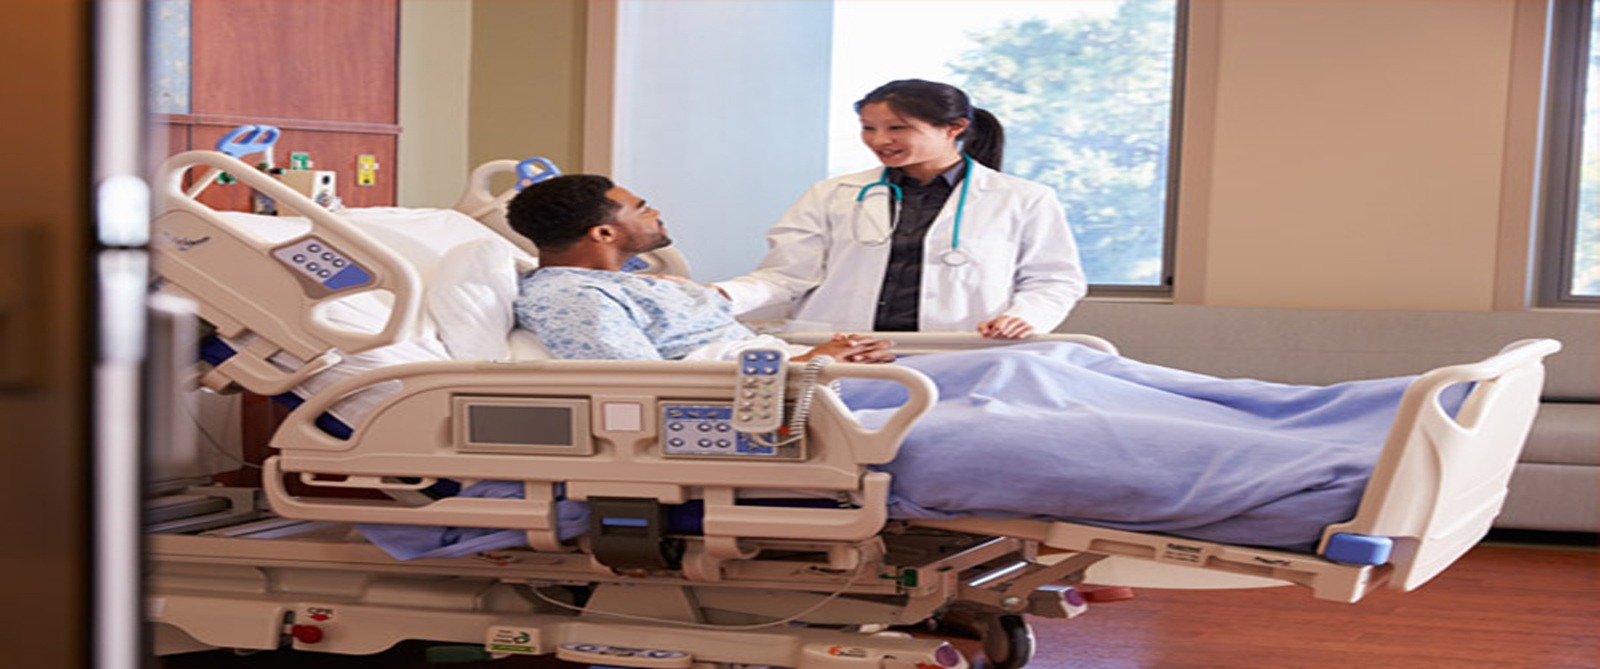 Tips on Caring for a Loved One With MS - Best Nursing Companies in Qatar